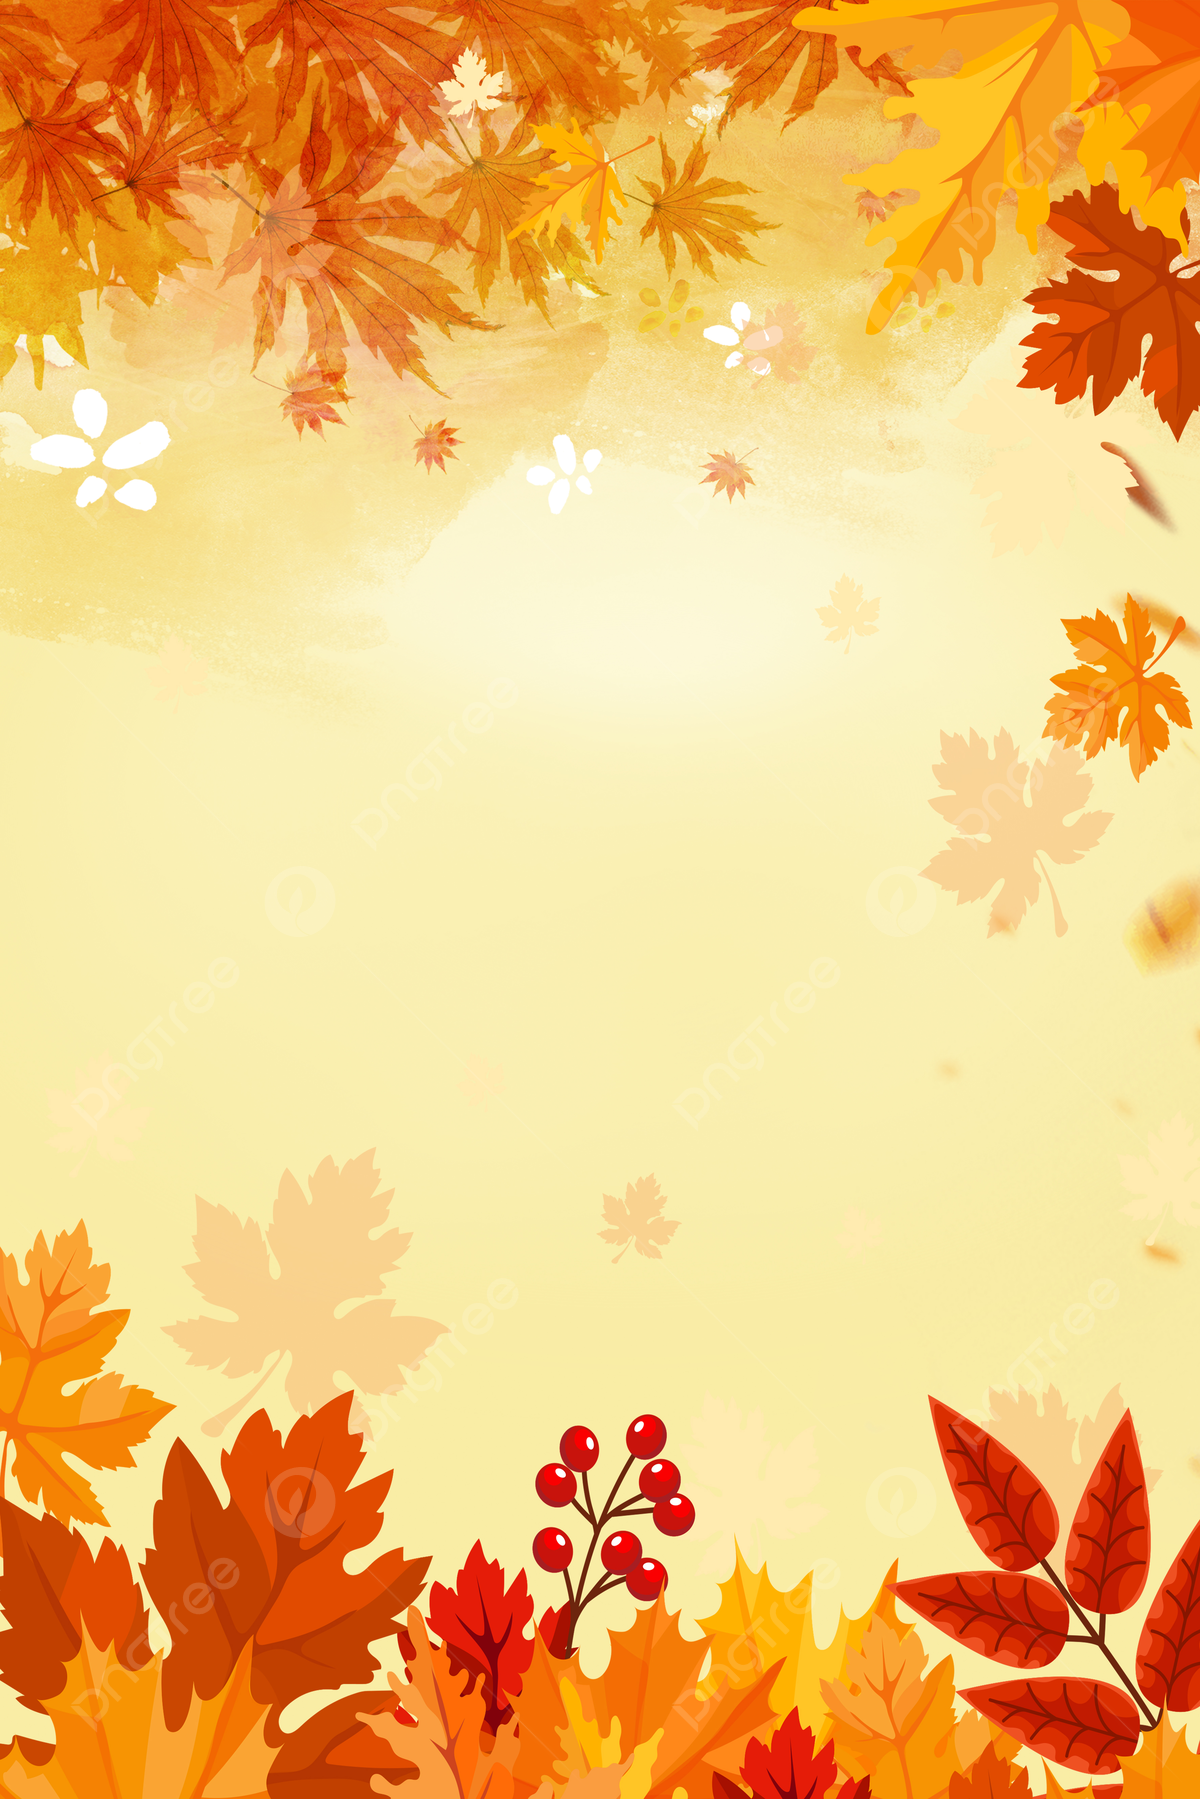 Fall background images hd pictures and wallpaper for free download